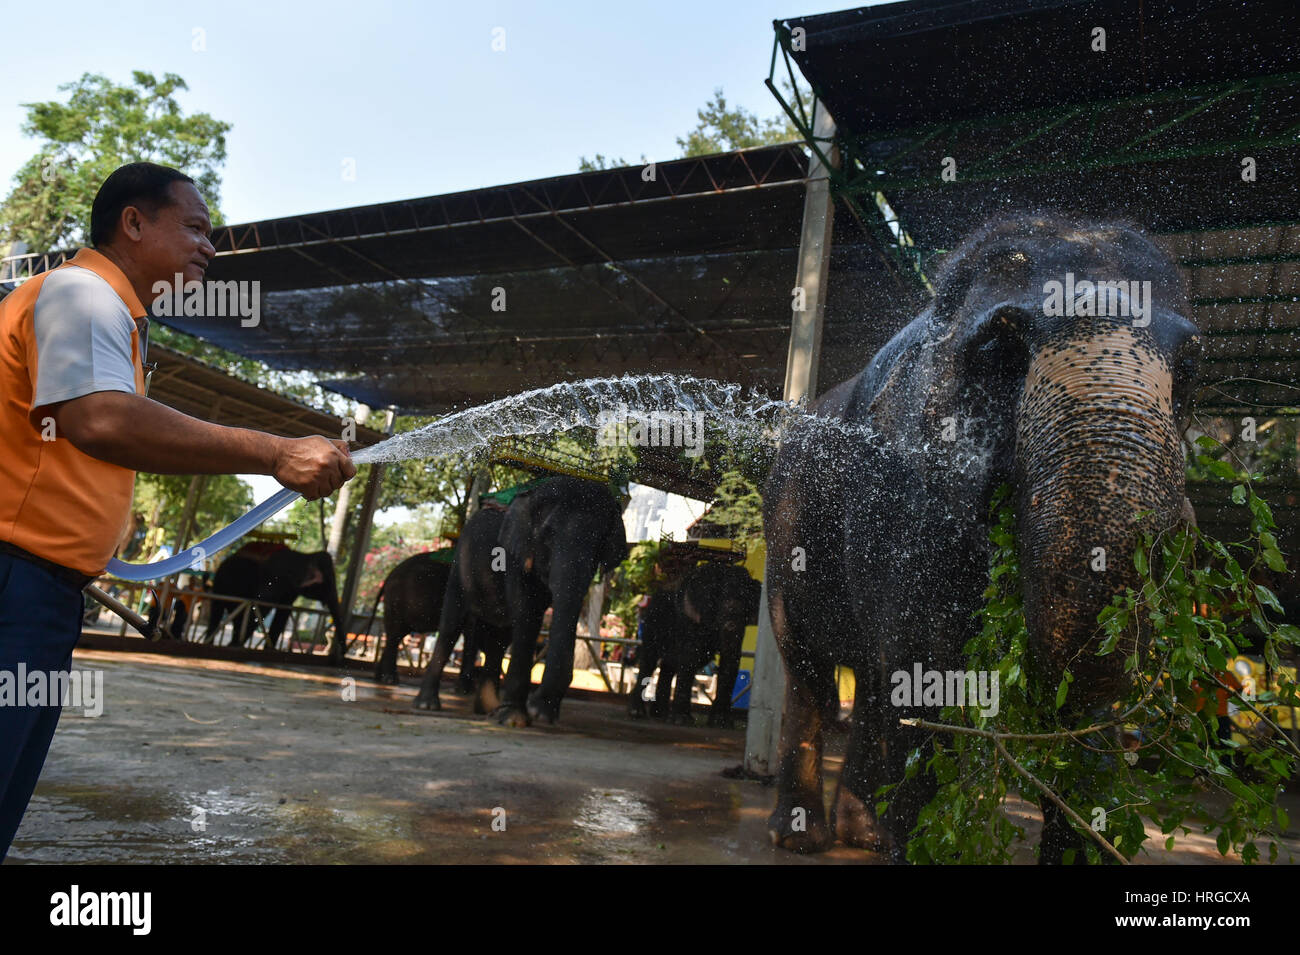 Chonburi. 1st Mar, 2017. A mahout helps an Asian elephant take a shower at a zoo in central Thailand's Chonburi Province, March 1, 2017. In Thailand, elephant-related entertainments serve as an important source of tourism revenue. Although elephant domestication has existed for centuries, controversies over abuses during elephant training and performance still occur from time to time. Credit: Li Mangmang/Xinhua/Alamy Live News Stock Photo